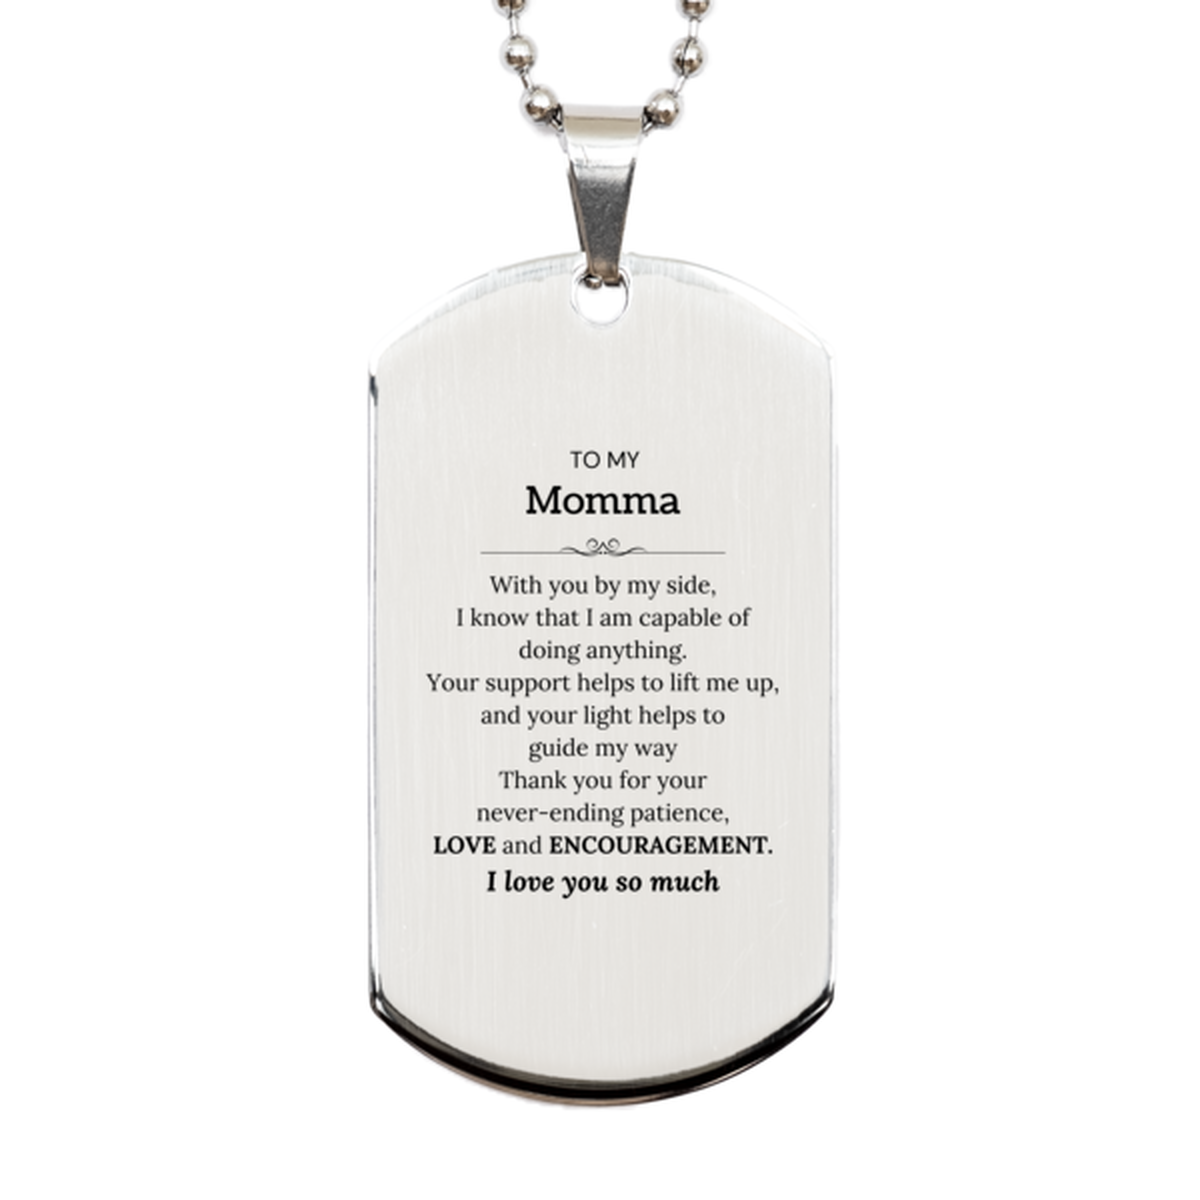 Appreciation Momma Silver Dog Tag Gifts, To My Momma Birthday Christmas Wedding Keepsake Gifts for Momma With you by my side, I know that I am capable of doing anything. I love you so much